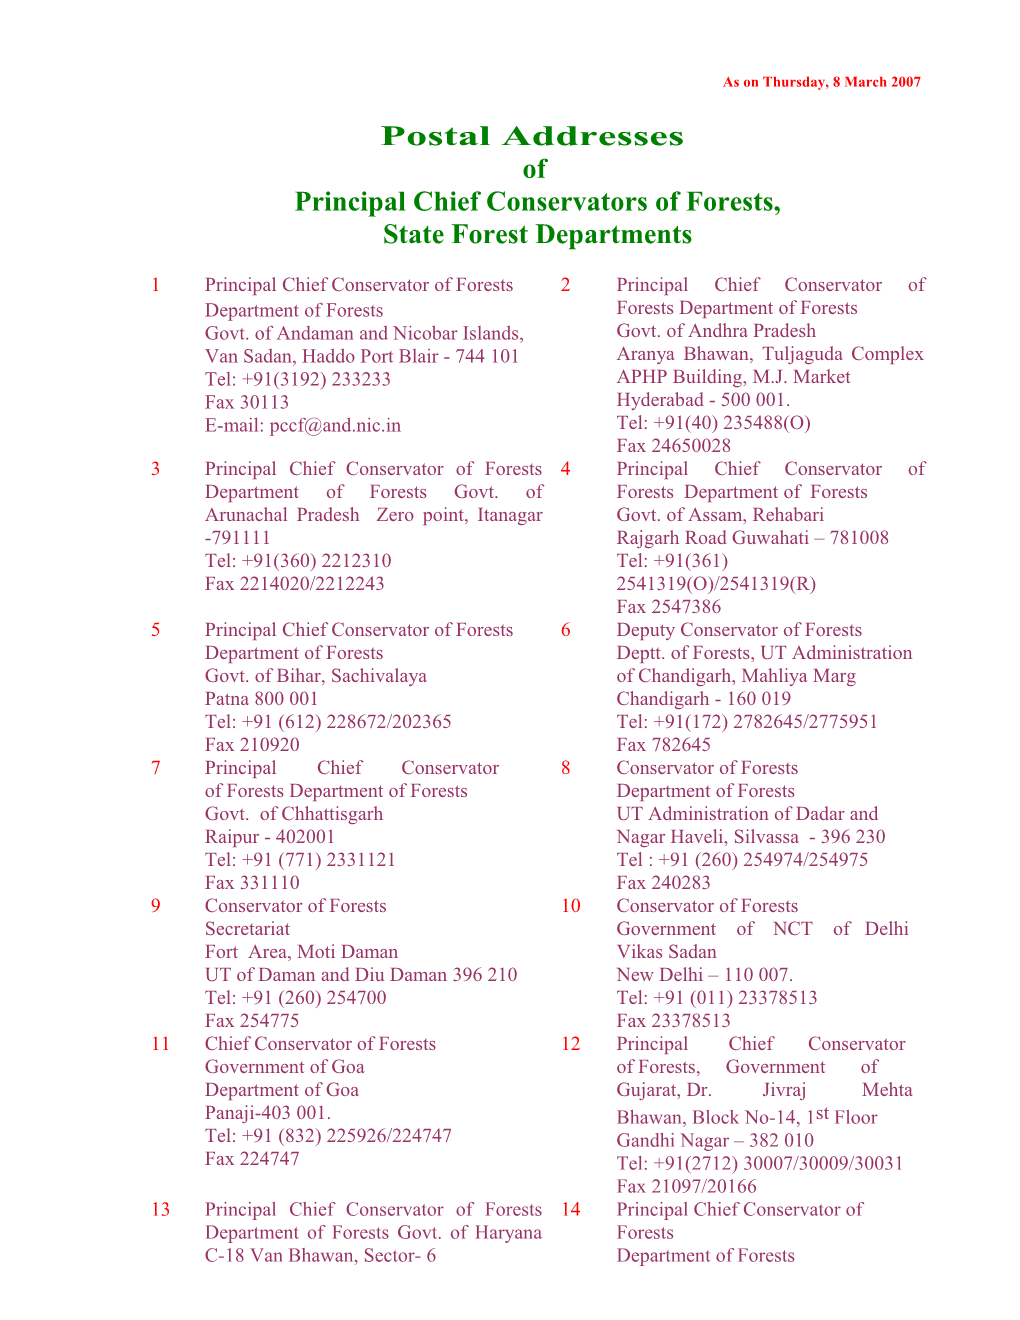 Principal Chief Conservators of Forests